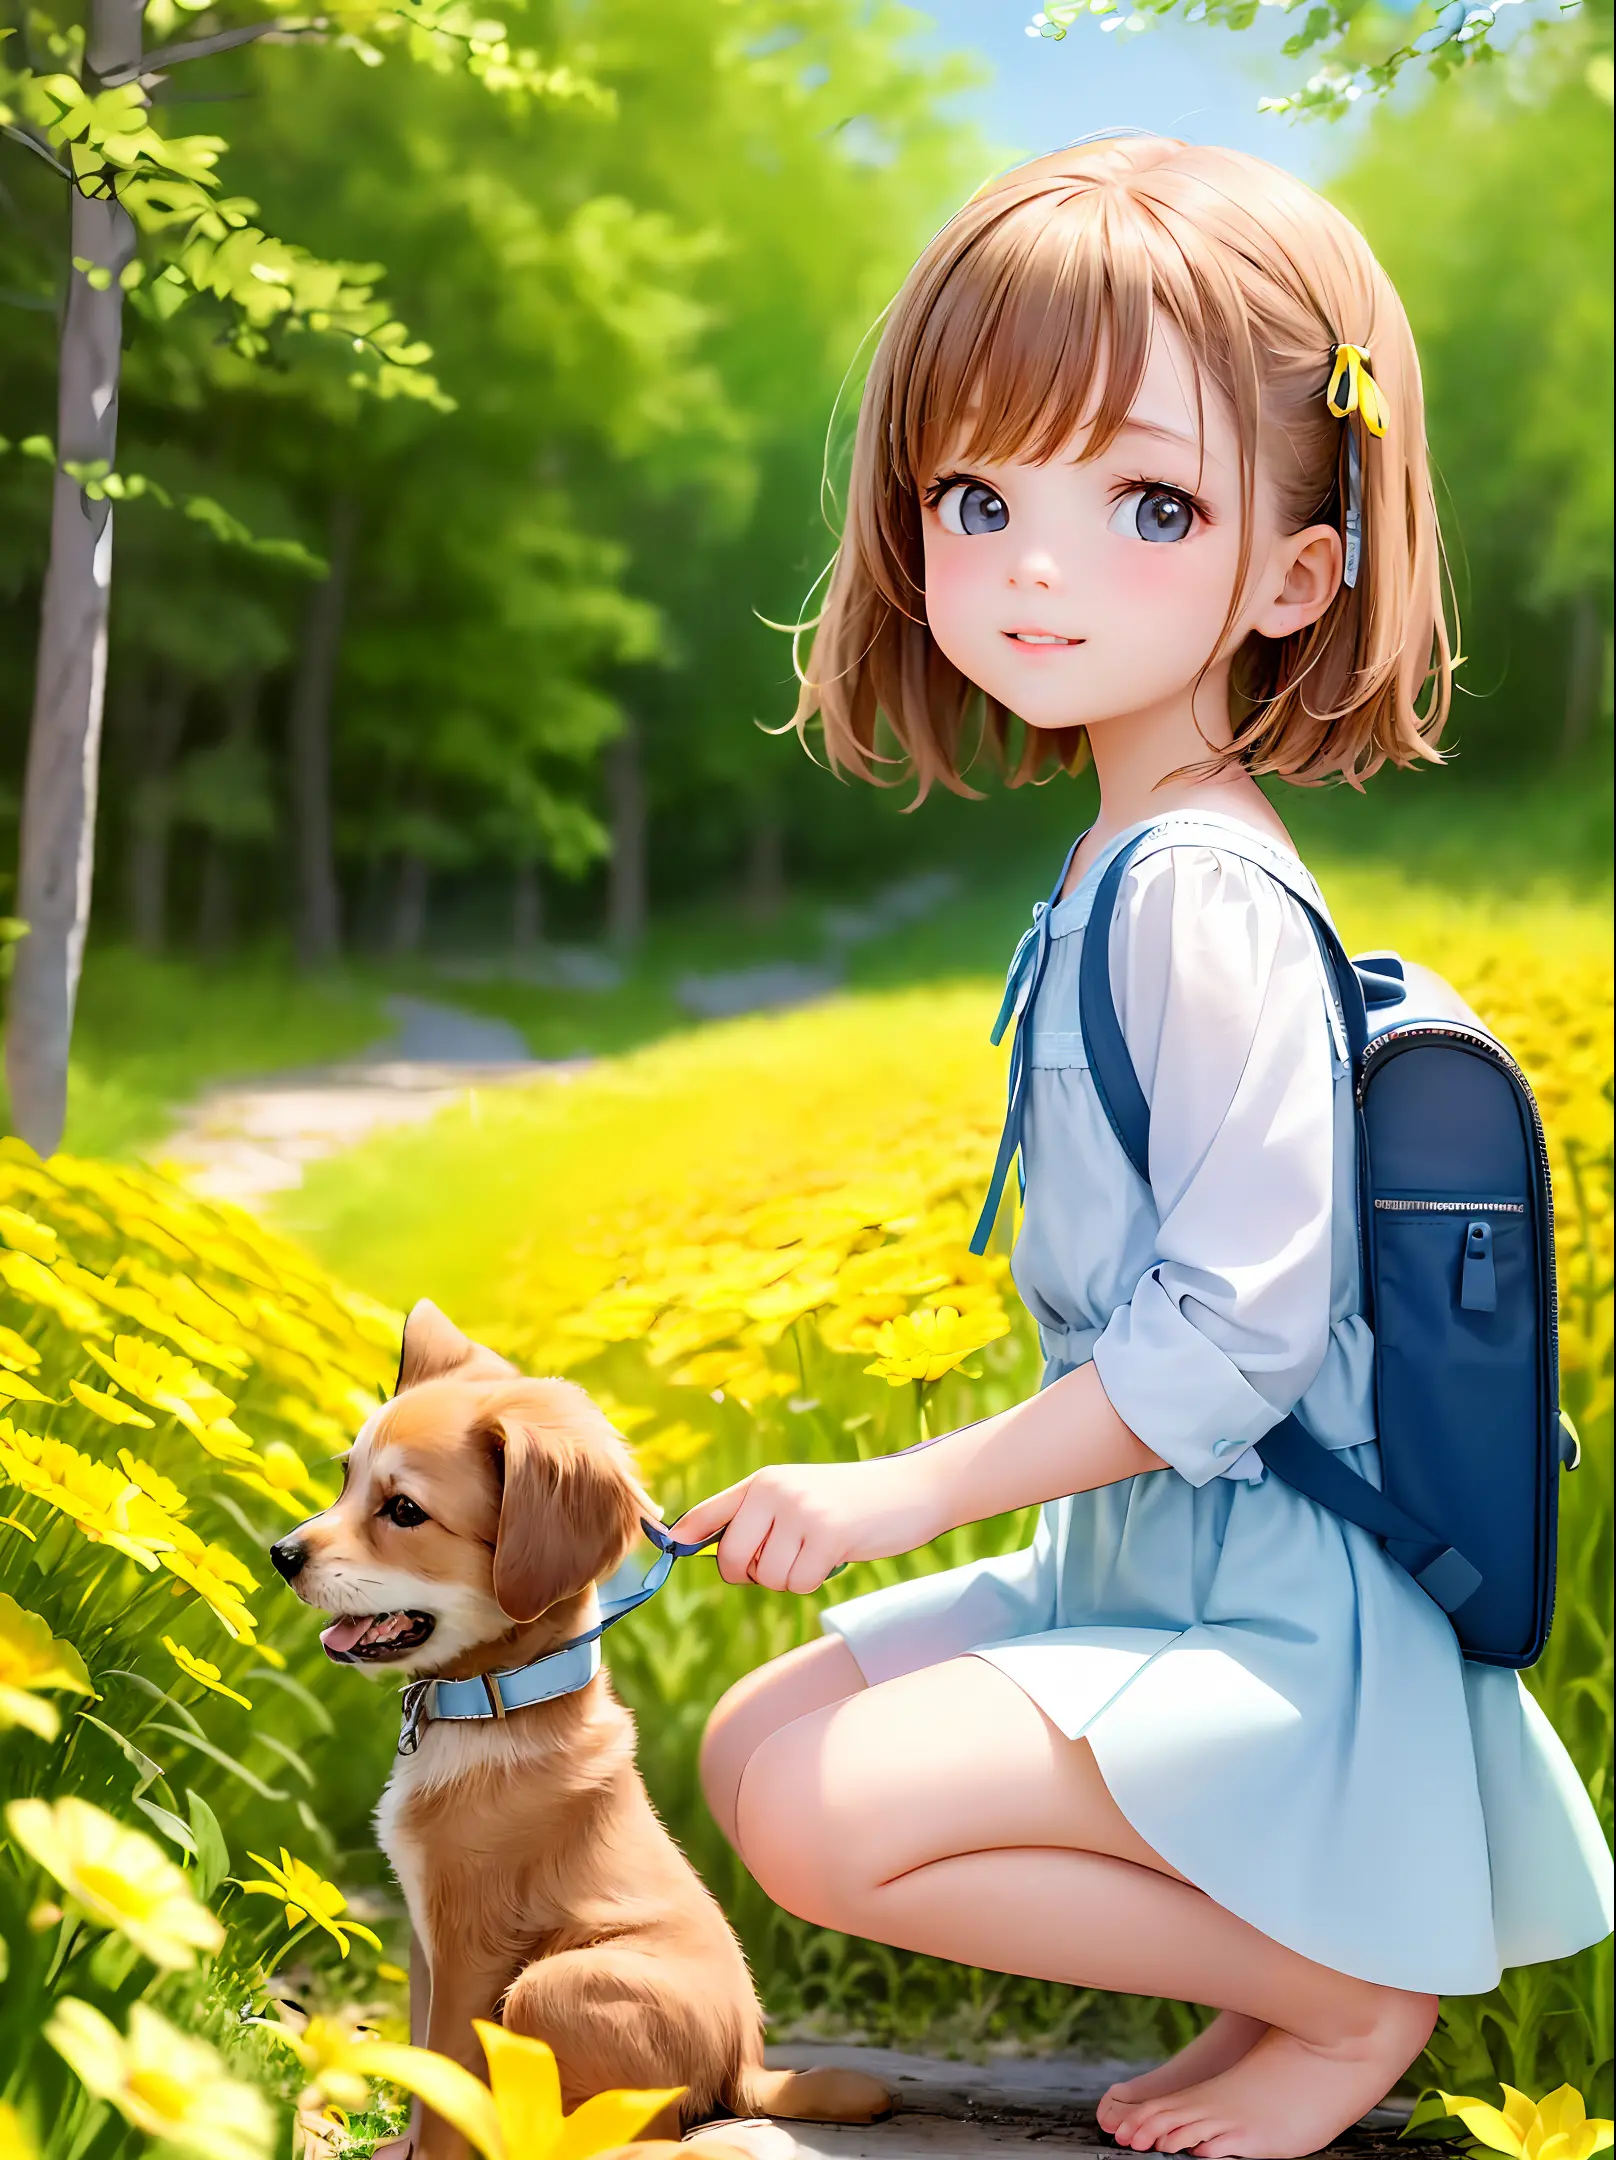 A very charming little girl with a backpack and her cute puppy enjoying a lovely spring outing surrounded by beautiful yellow fl...